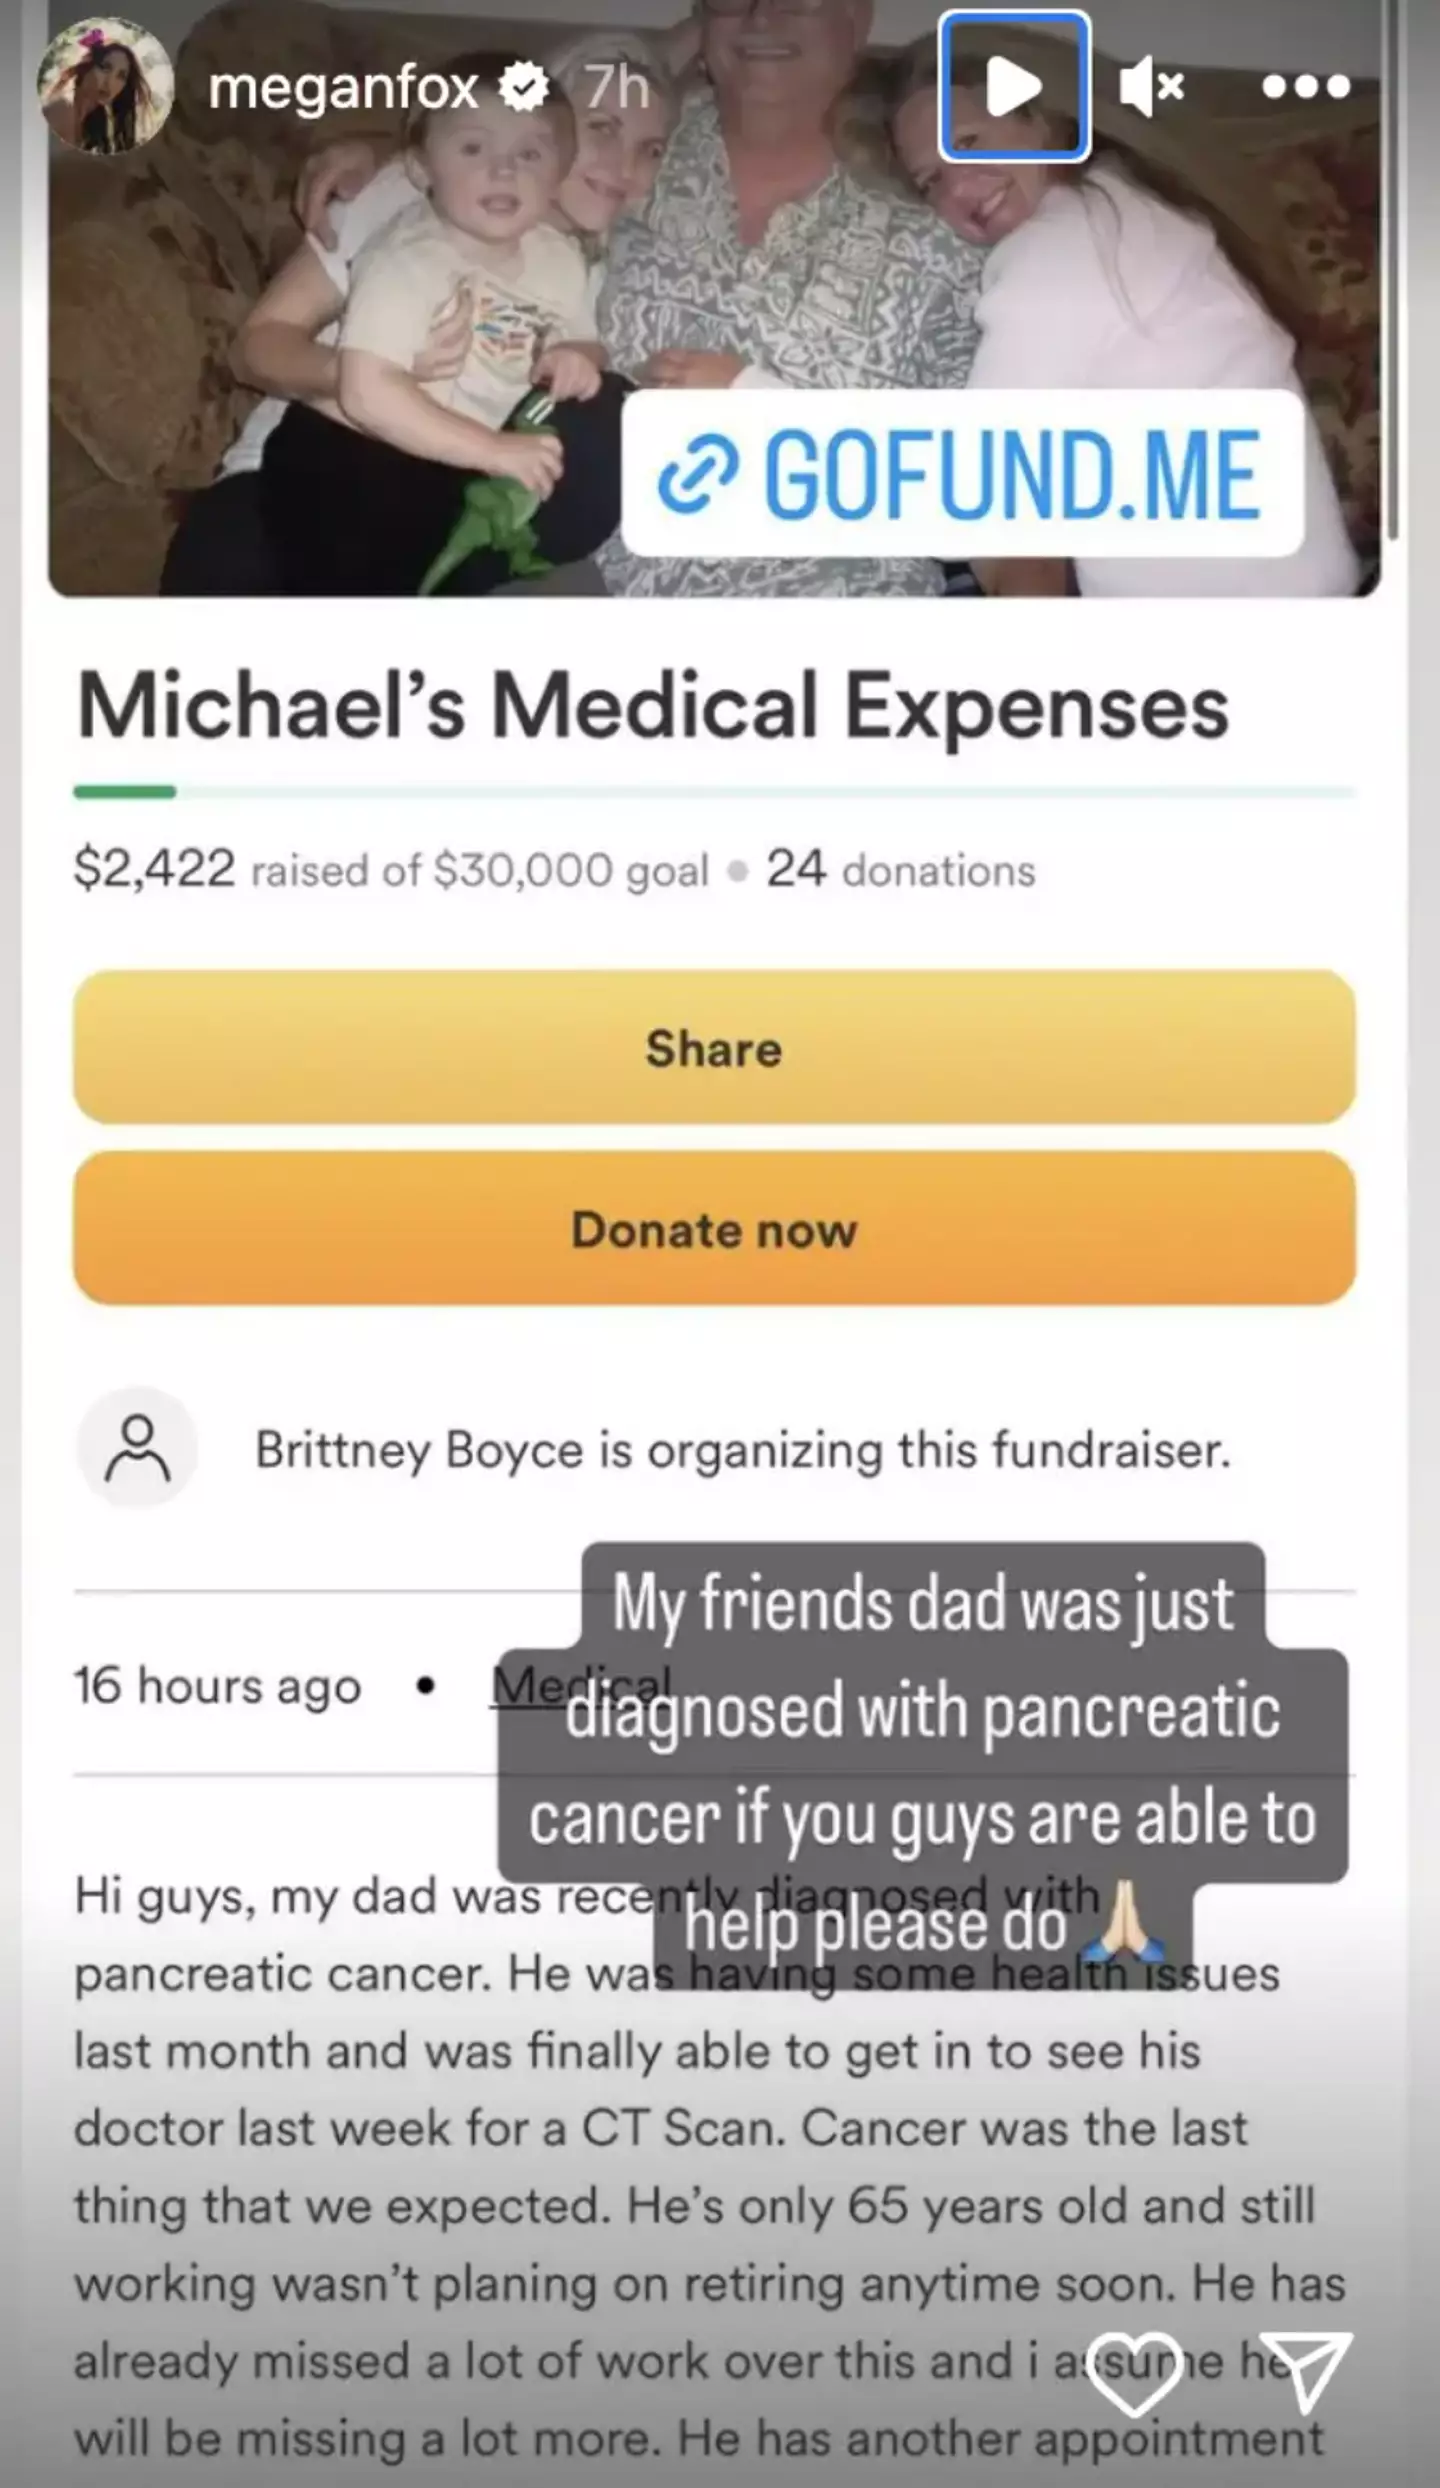 Megan Fox shared the GoFundMe on her own Instagram account.